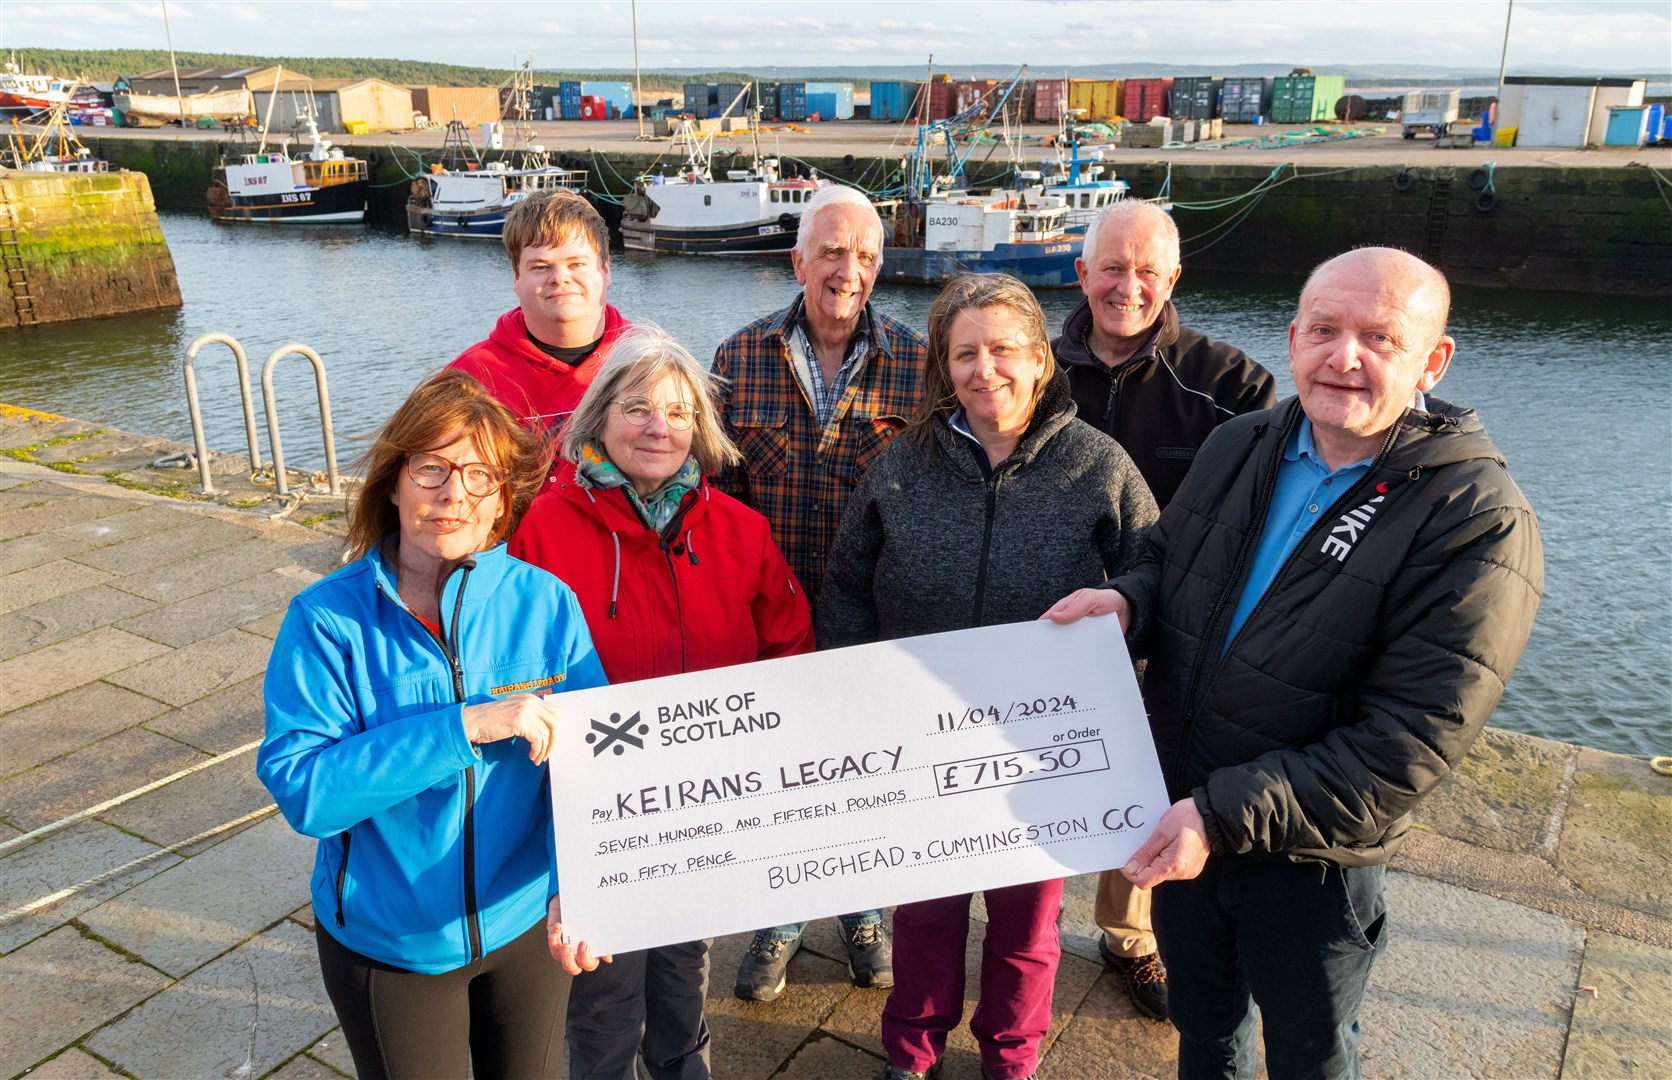 Members of the Burghead and Cummingston Community Council hand over a cheque to Sandra McKandie from Keirans Legacy for £715.50. Picture: Beth Taylor